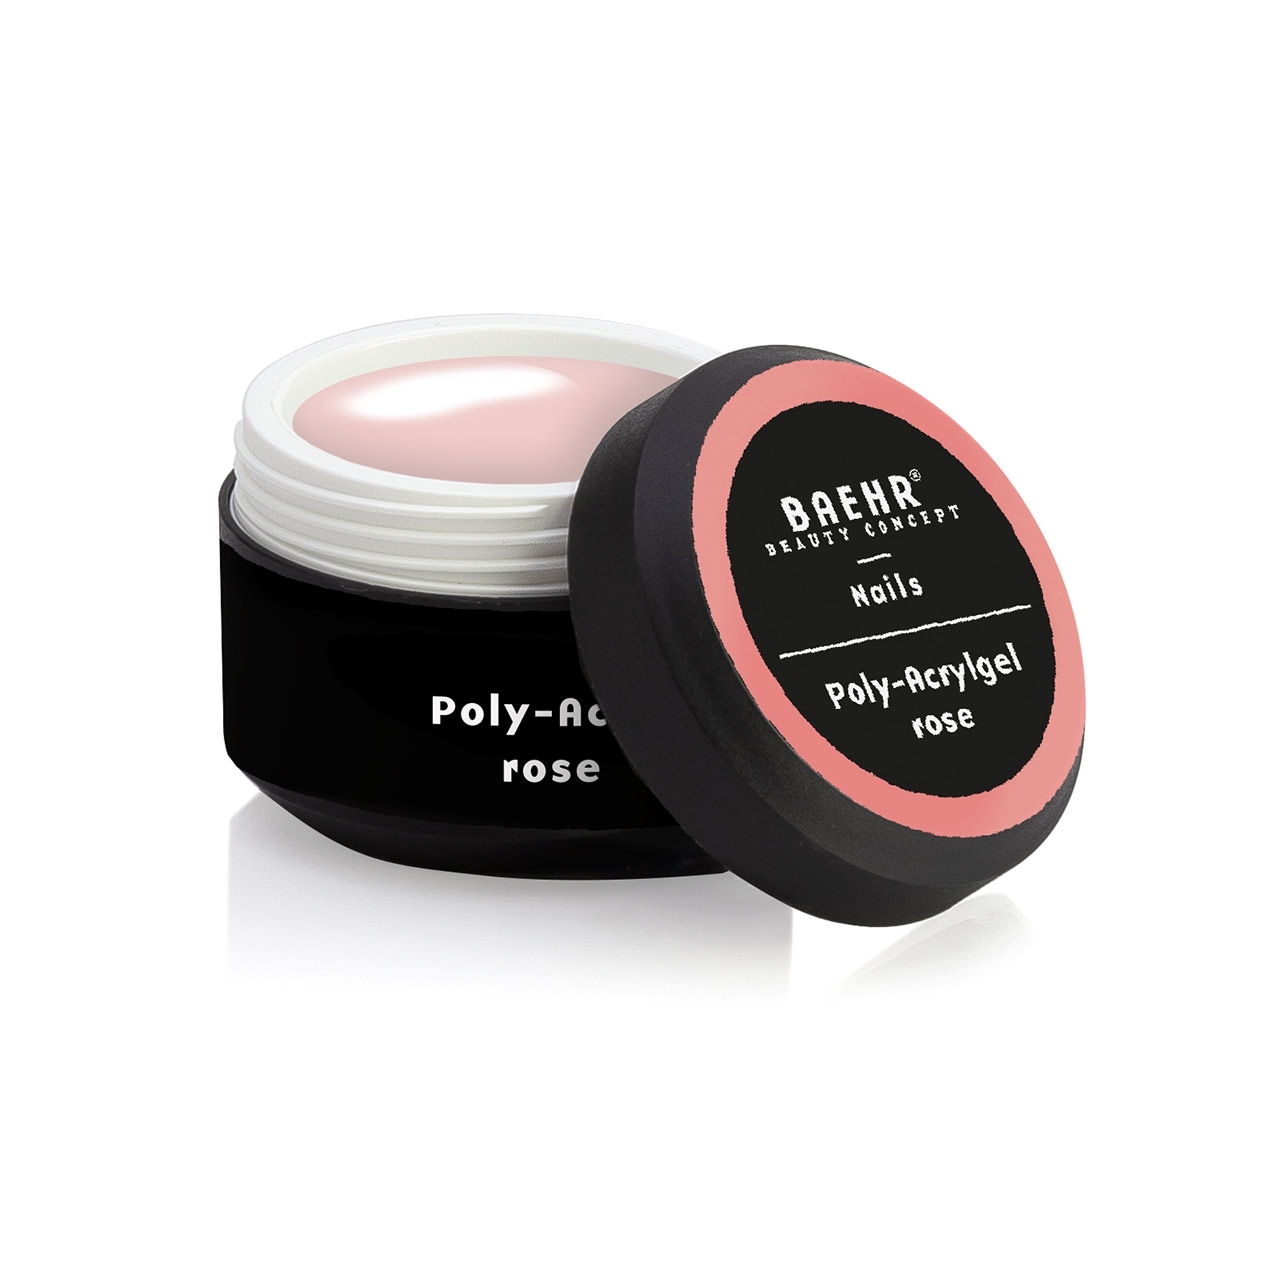 BAEHR BEAUTY CONCEPT - NAILS Poly-Acrylgel rose 30 ml